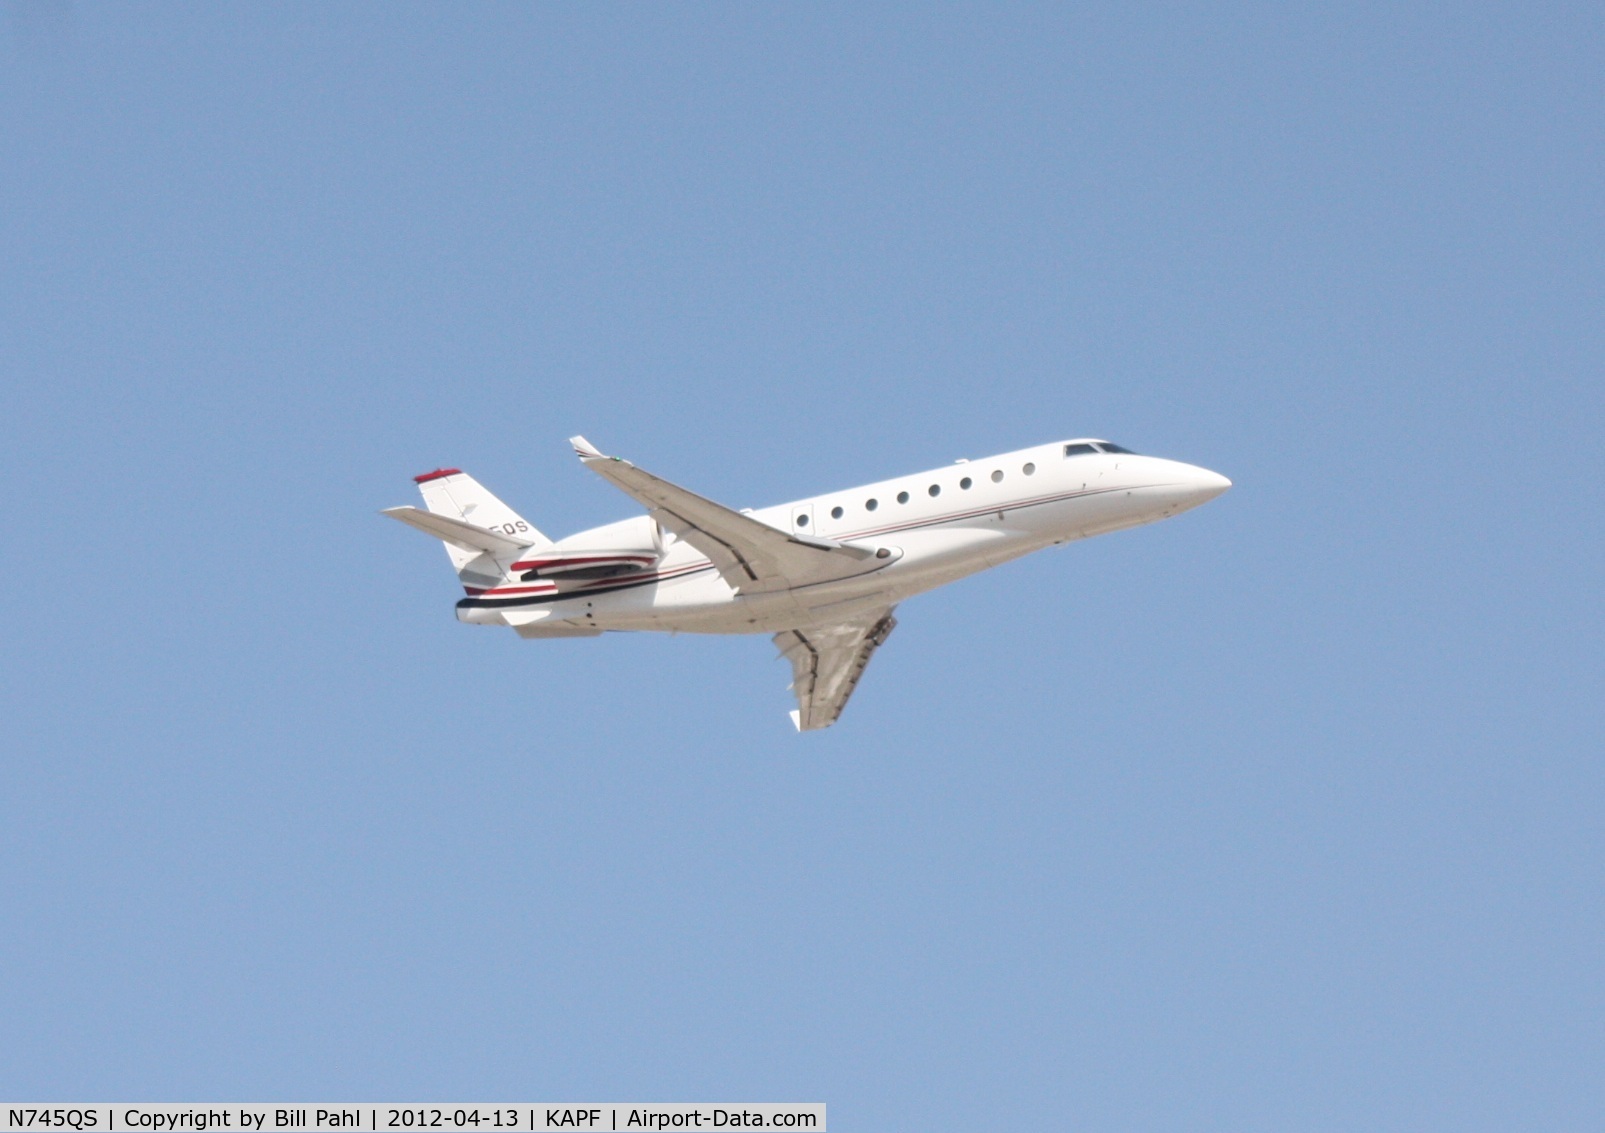 N745QS, 2007 Israel Aircraft Industries Gulfstream 200 C/N 170, Shortly after takeoff from Naples Municipal